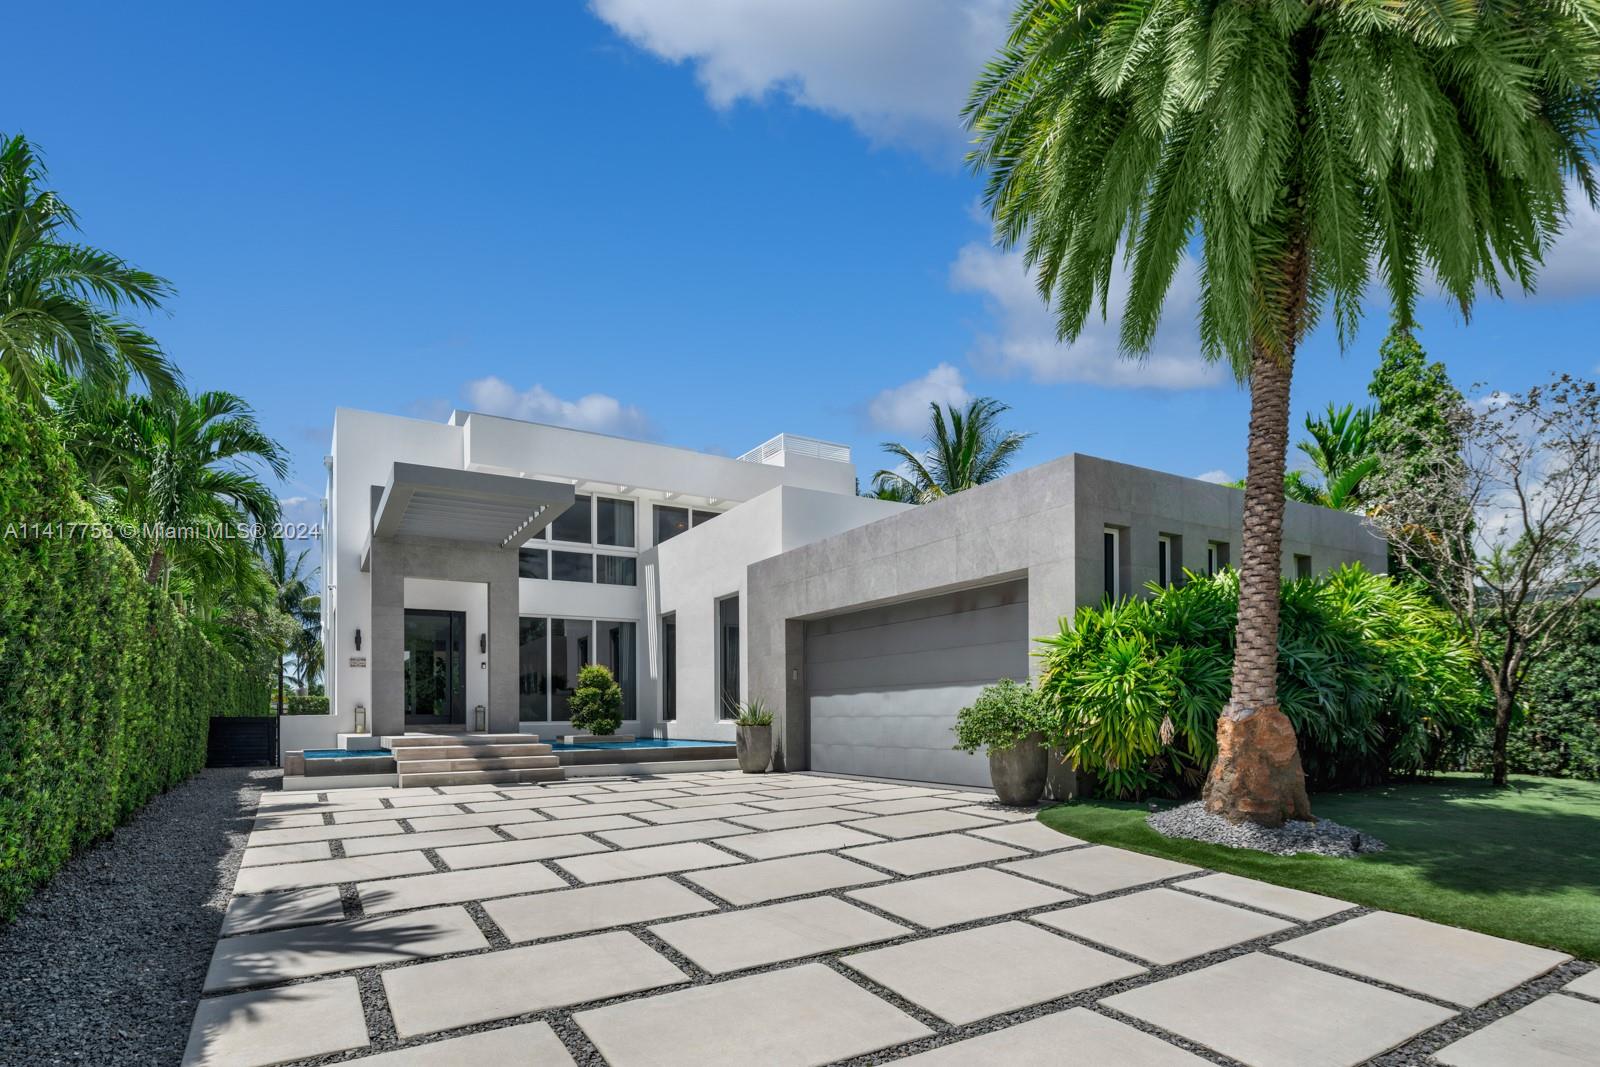 Step Inside With Me! Presenting a modern waterfront custom home in Miami Beach’s guard-gated Normandy Isle. This 5,400+ SF smart home boasts 5 beds and 5.5 baths. Interior highlights include formal & informal lounges, open kitchen with Dornbracht fixtures, tray ceilings, oak millwork, marble flooring & a proper cinema room. The water-facing primary features an office, spacious walk-in closet & an impressive marble bath, plus an oversized terrace. The spacious rooftop deck with stunning views offers a BBQ, dining area, and spa. Expect constant sun at the resort pool from its coveted Southern position. More to love: dock with boat lift, 60 FT of water,  2-car garage, privacy gate, solar panels & generator. Minutes from Normandy Shores Golf Club, 672 S Shore is ideal for boaters and golfers.